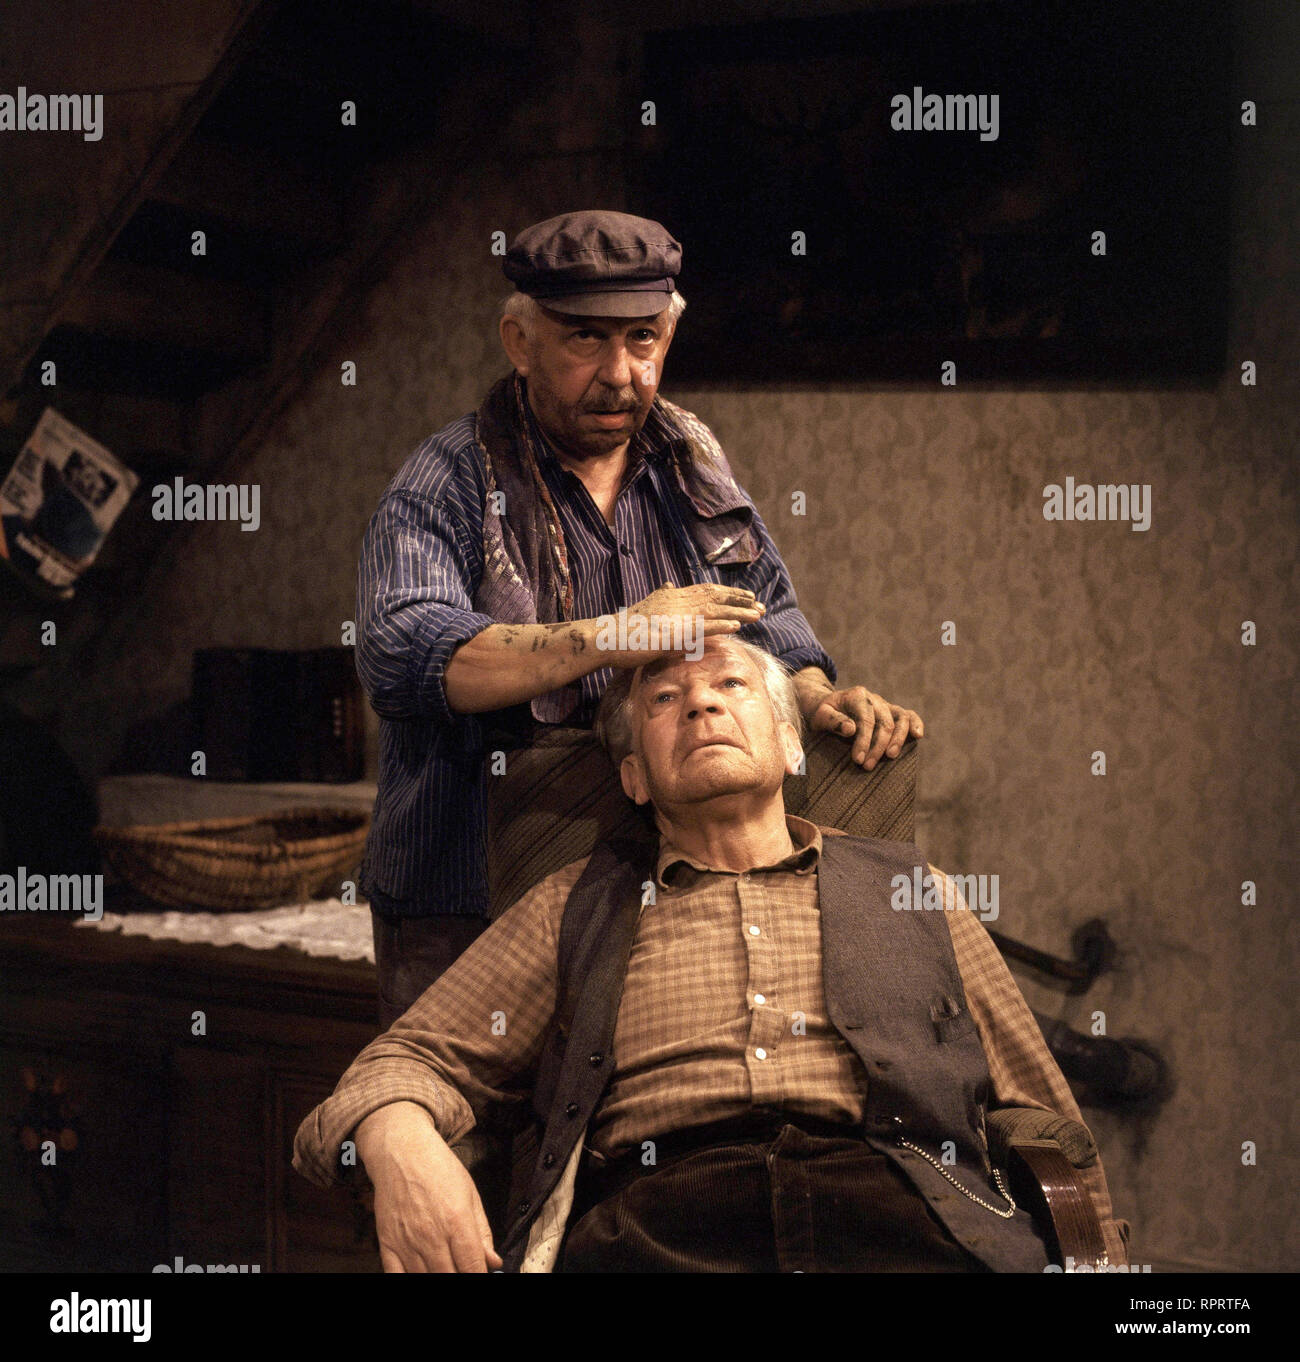 Page 2 - Karl Fritz High Resolution Photography and Images - Alamy